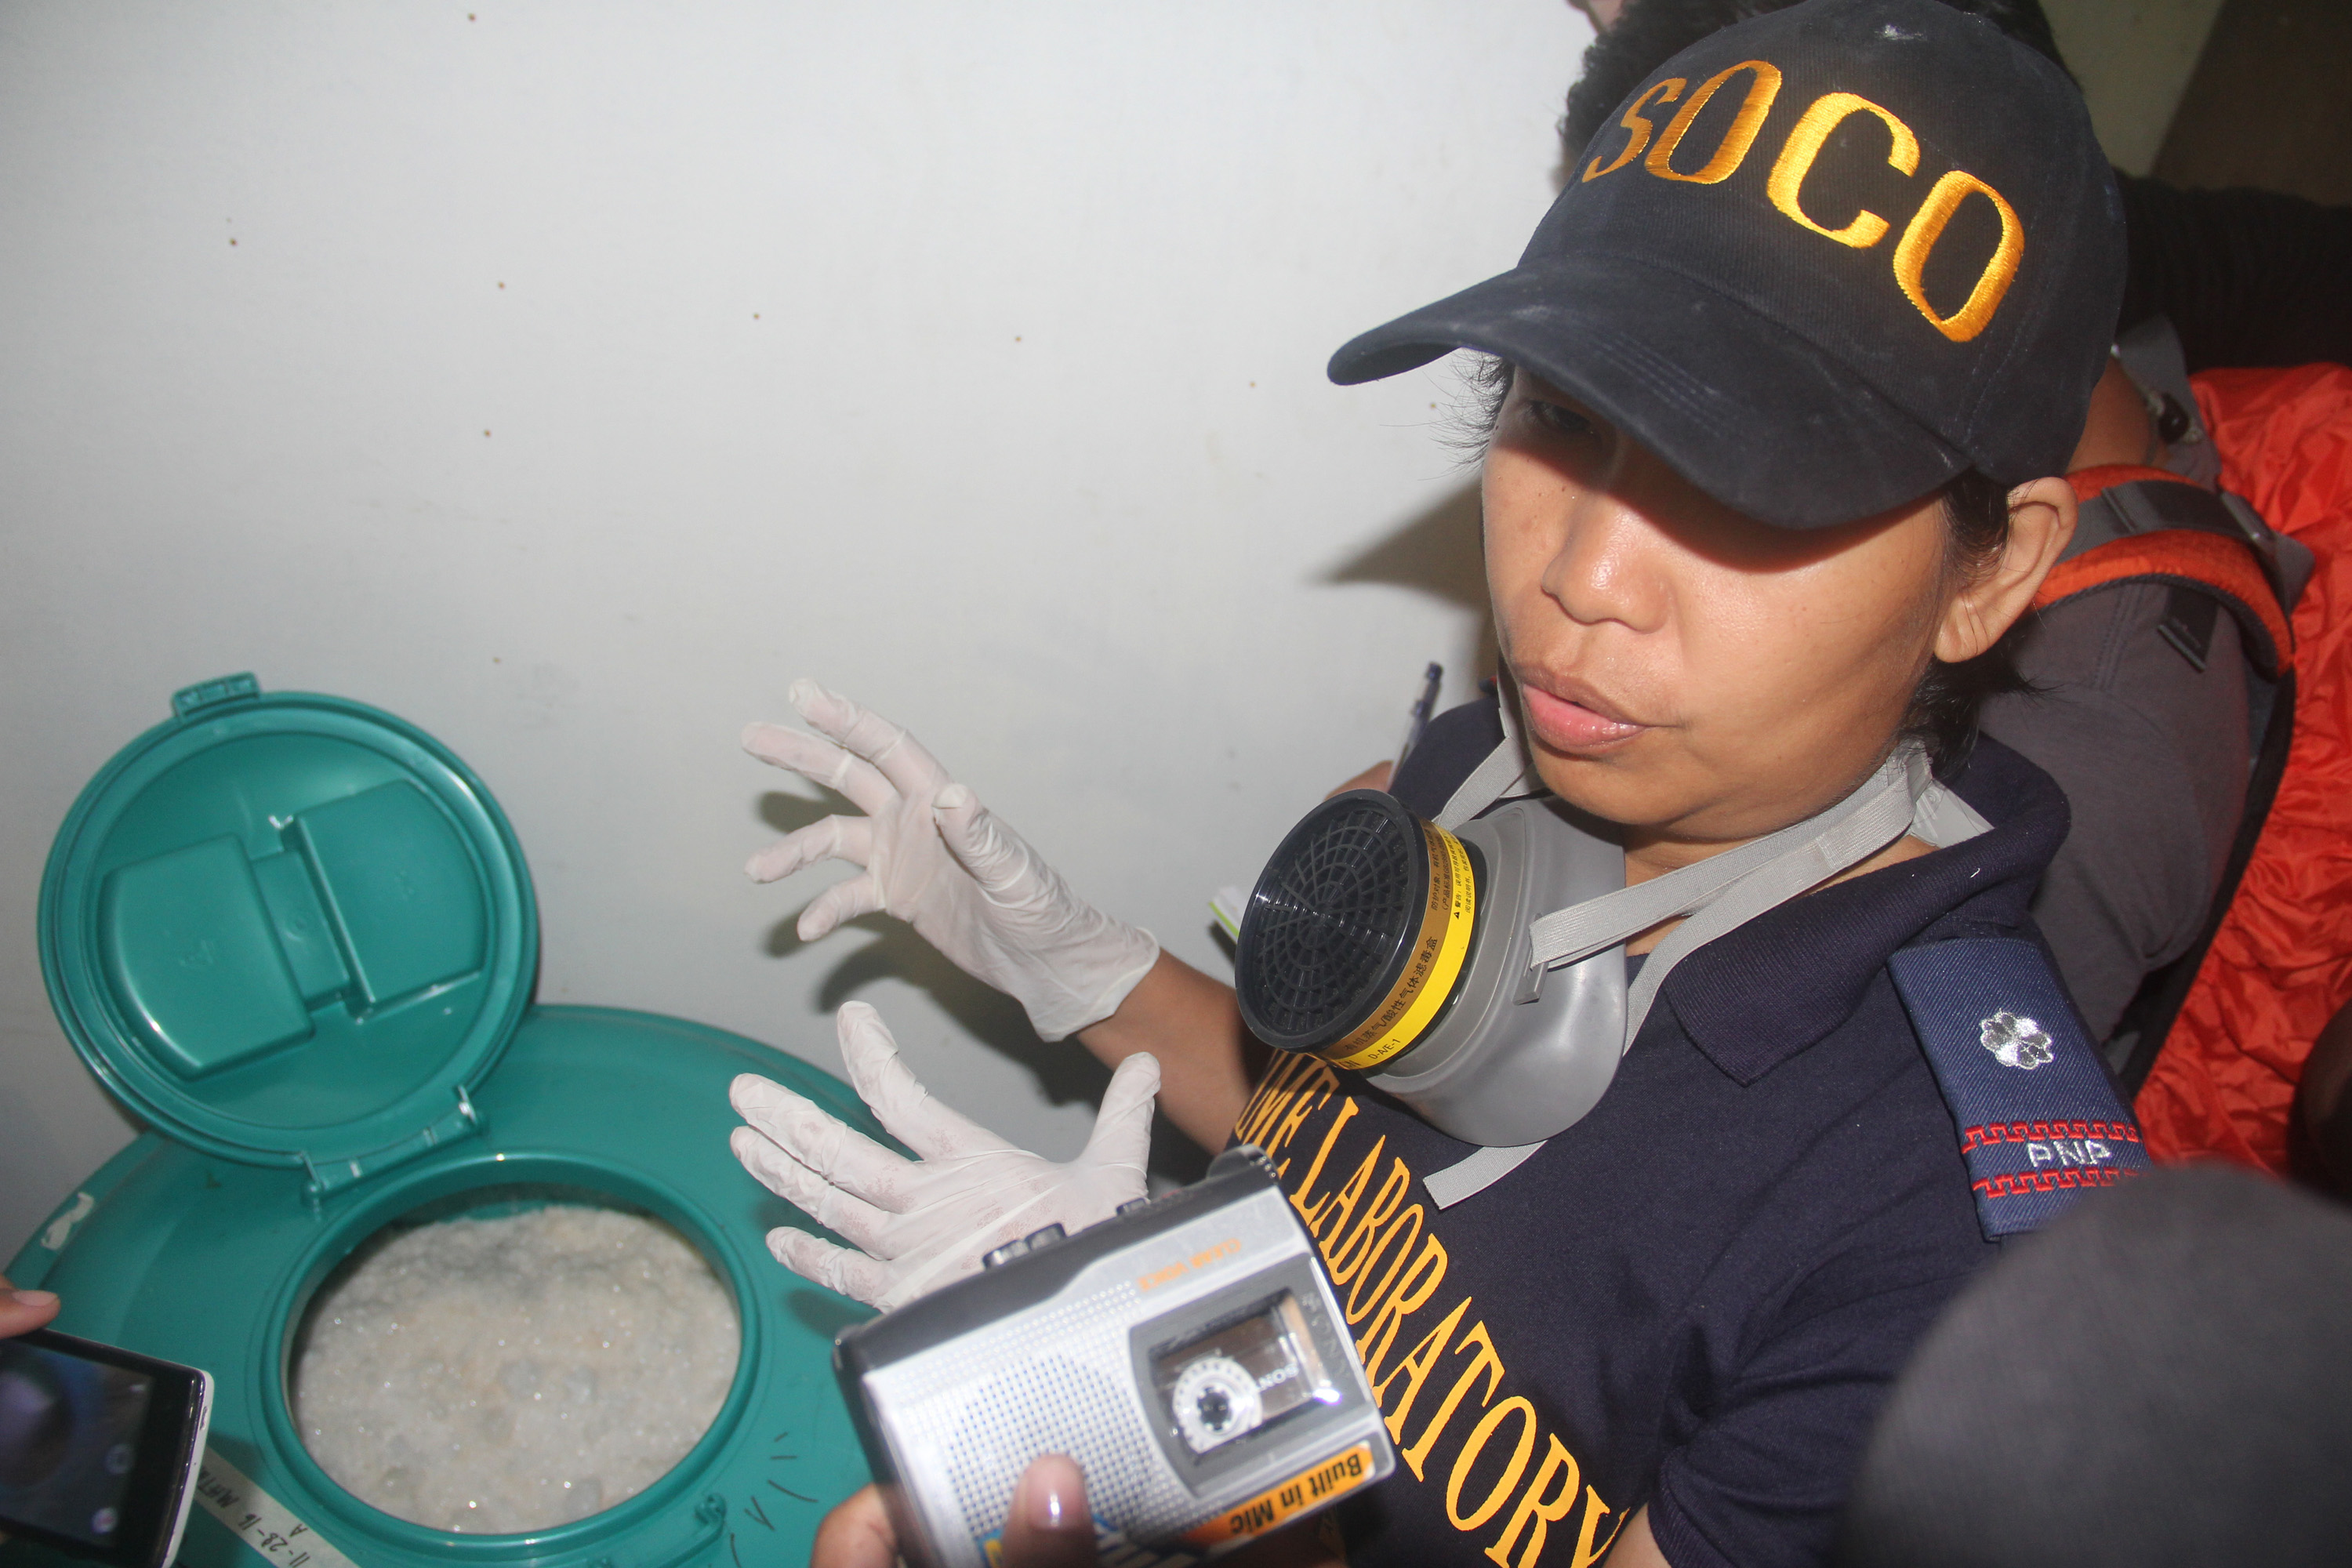 SHABU-MAKING MATERIALS. Forensic official Josephine Clemen of PNP Crime Lab shows off several drums of ephedrine hydrochloride used for shabu manufacturing discovered anew during the investigation. Photo by Rhaydz B. Barcia/Rappler  